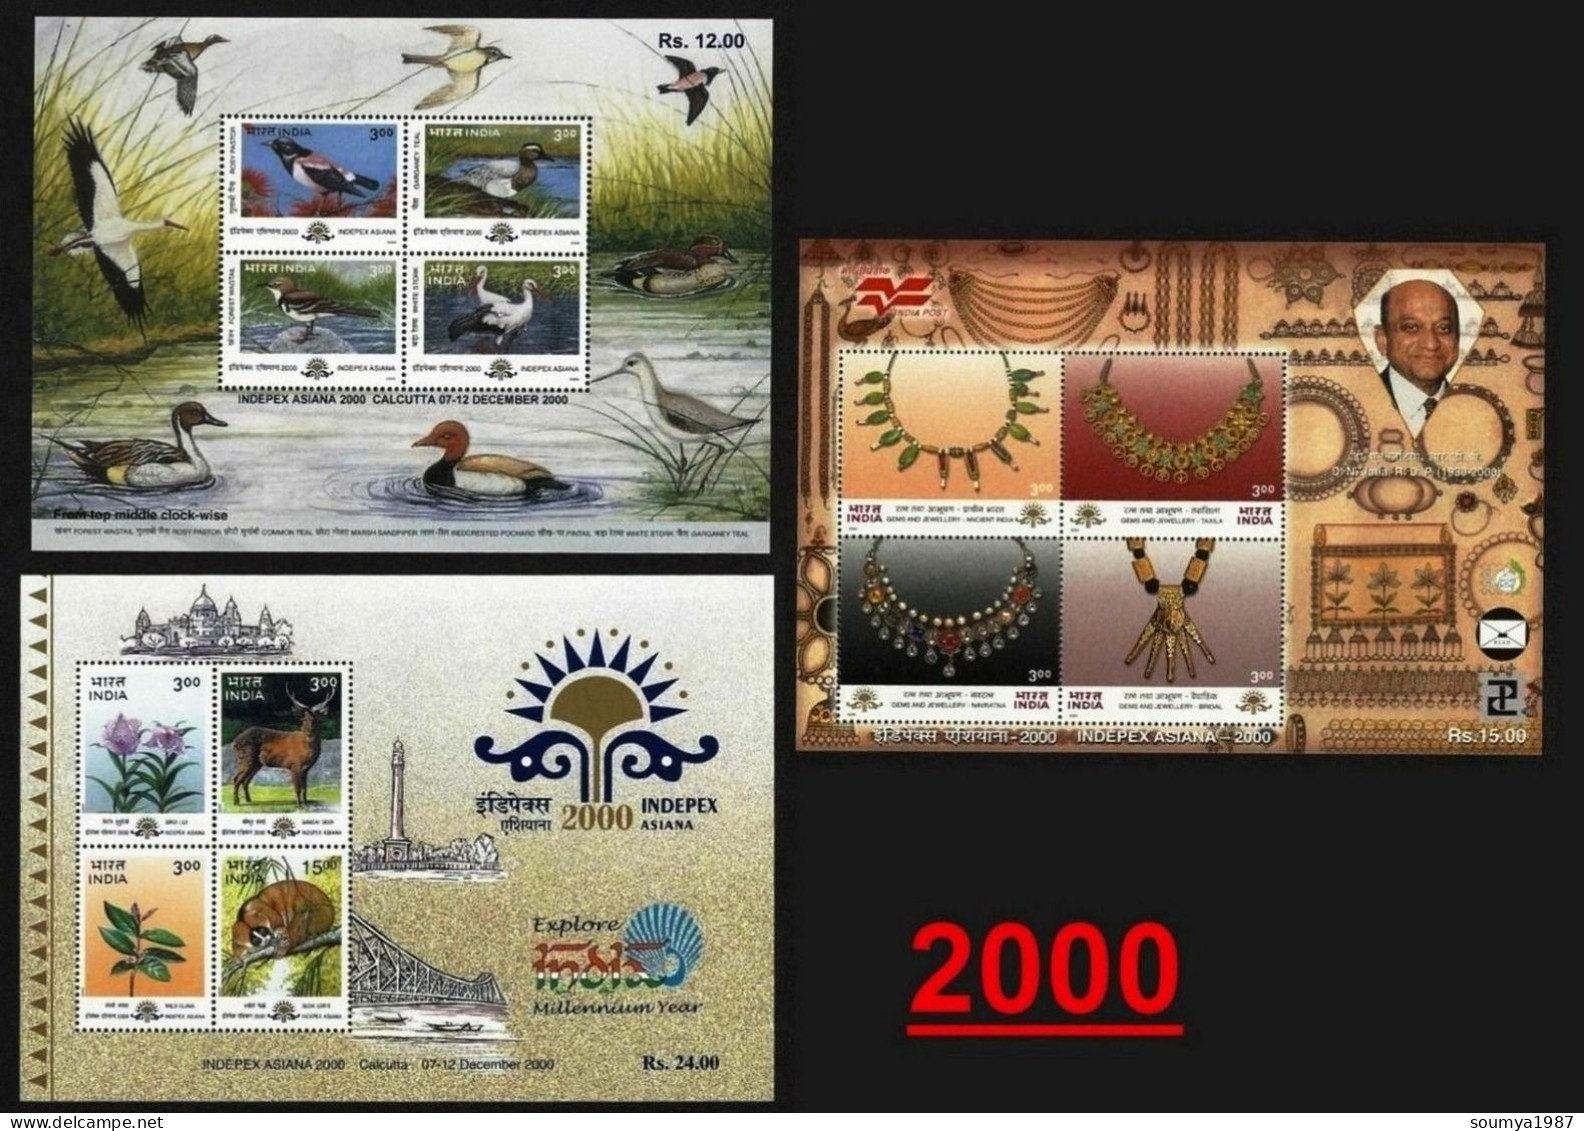 INDIA 2000 COMPLETE YEAR PACK OF MINIATURE SHEETS CONTAINS 3 MS OF FLOWERS, ANIMALS, BIRDS, JUALARY, INDIPEX MS MNH - Unused Stamps